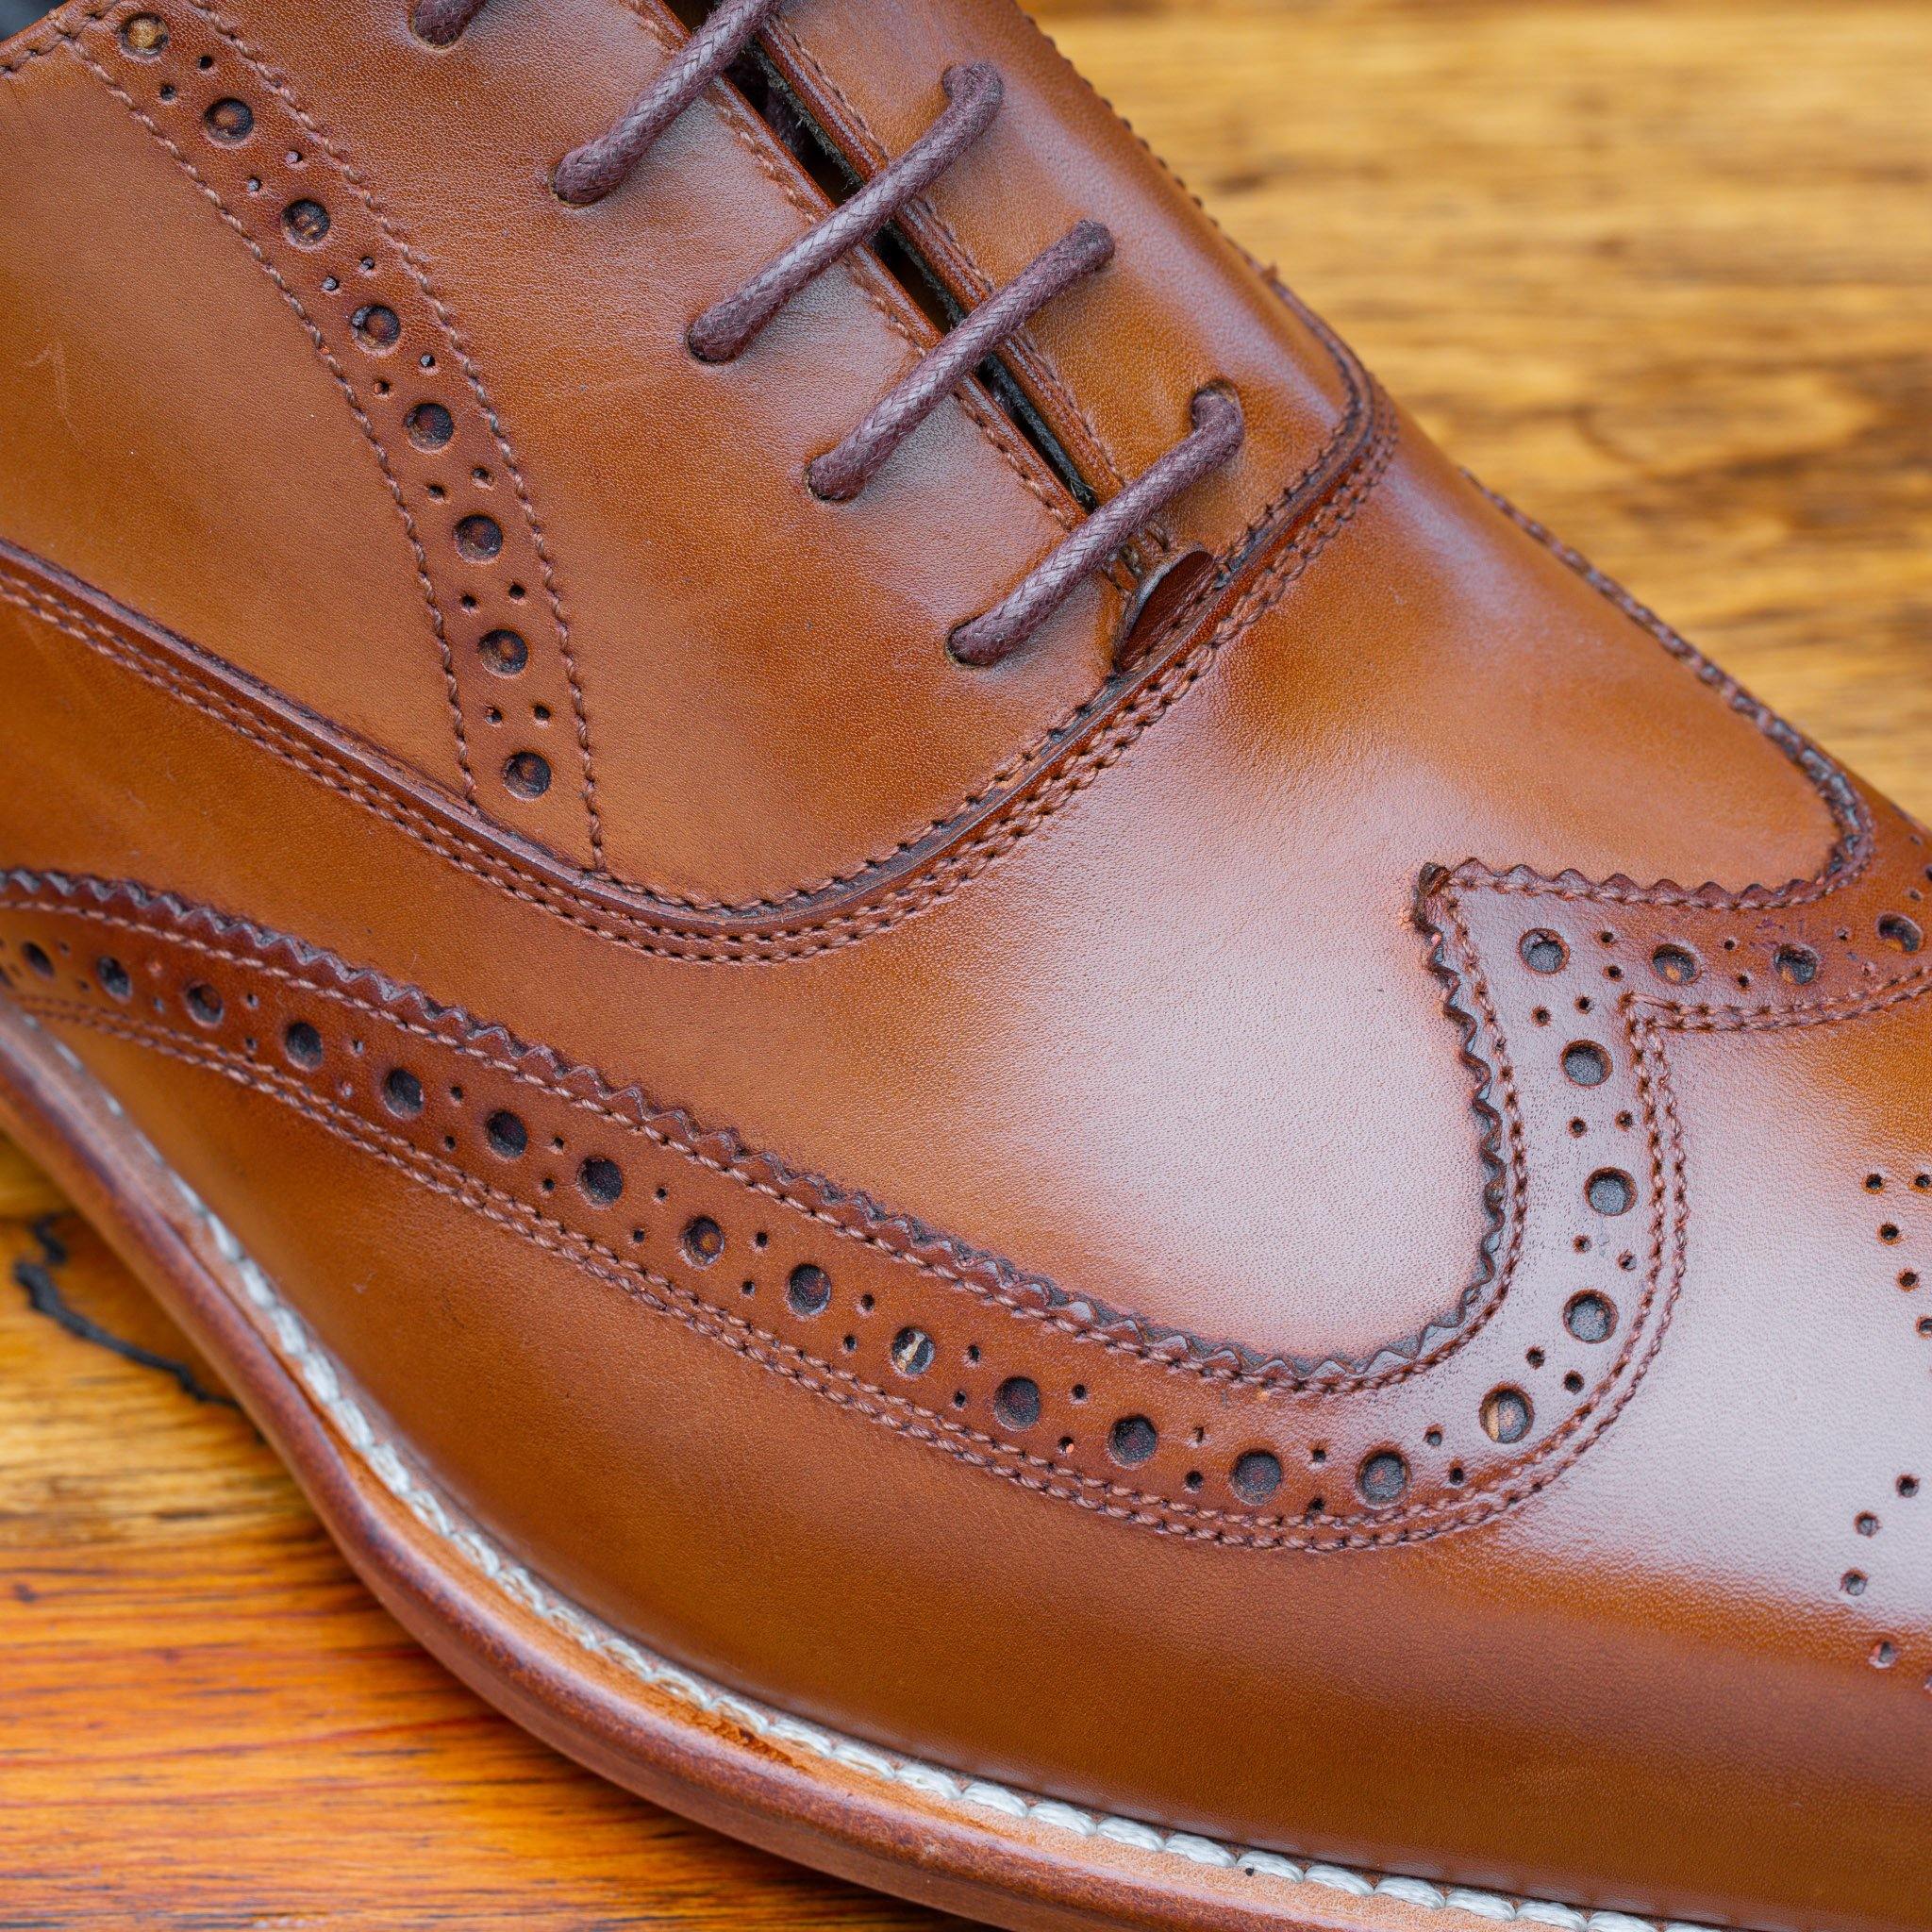 Up close picture of the vamp showing the wingtip detail on H310 Calzoleria Toscana Chester Onice Wingtip Balmoral